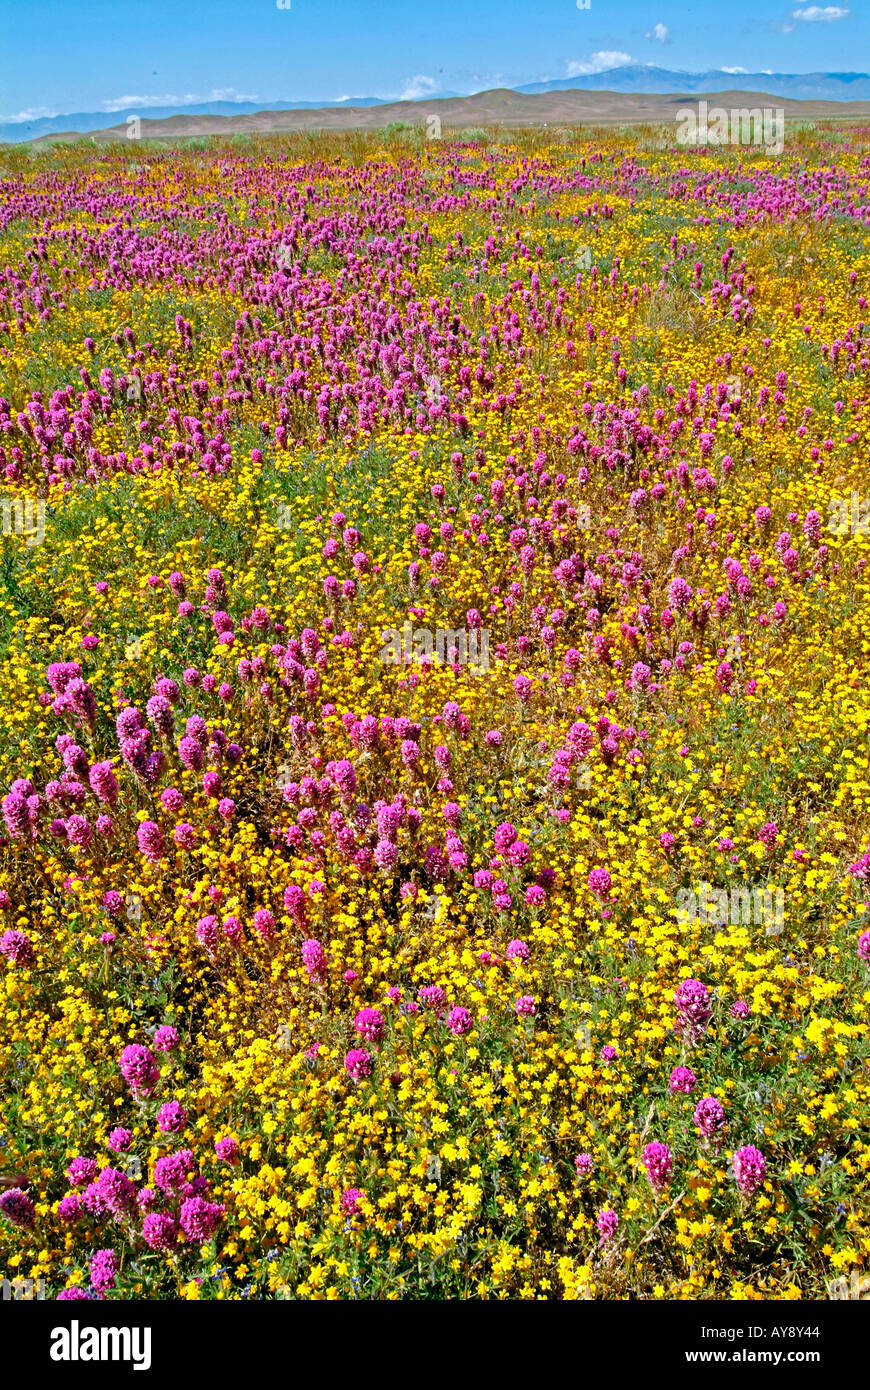 Field of Wildflowers in bloom in sunny southern California Antelope Valley in and around Poppy Reserve Mojave Desert Stock Photo